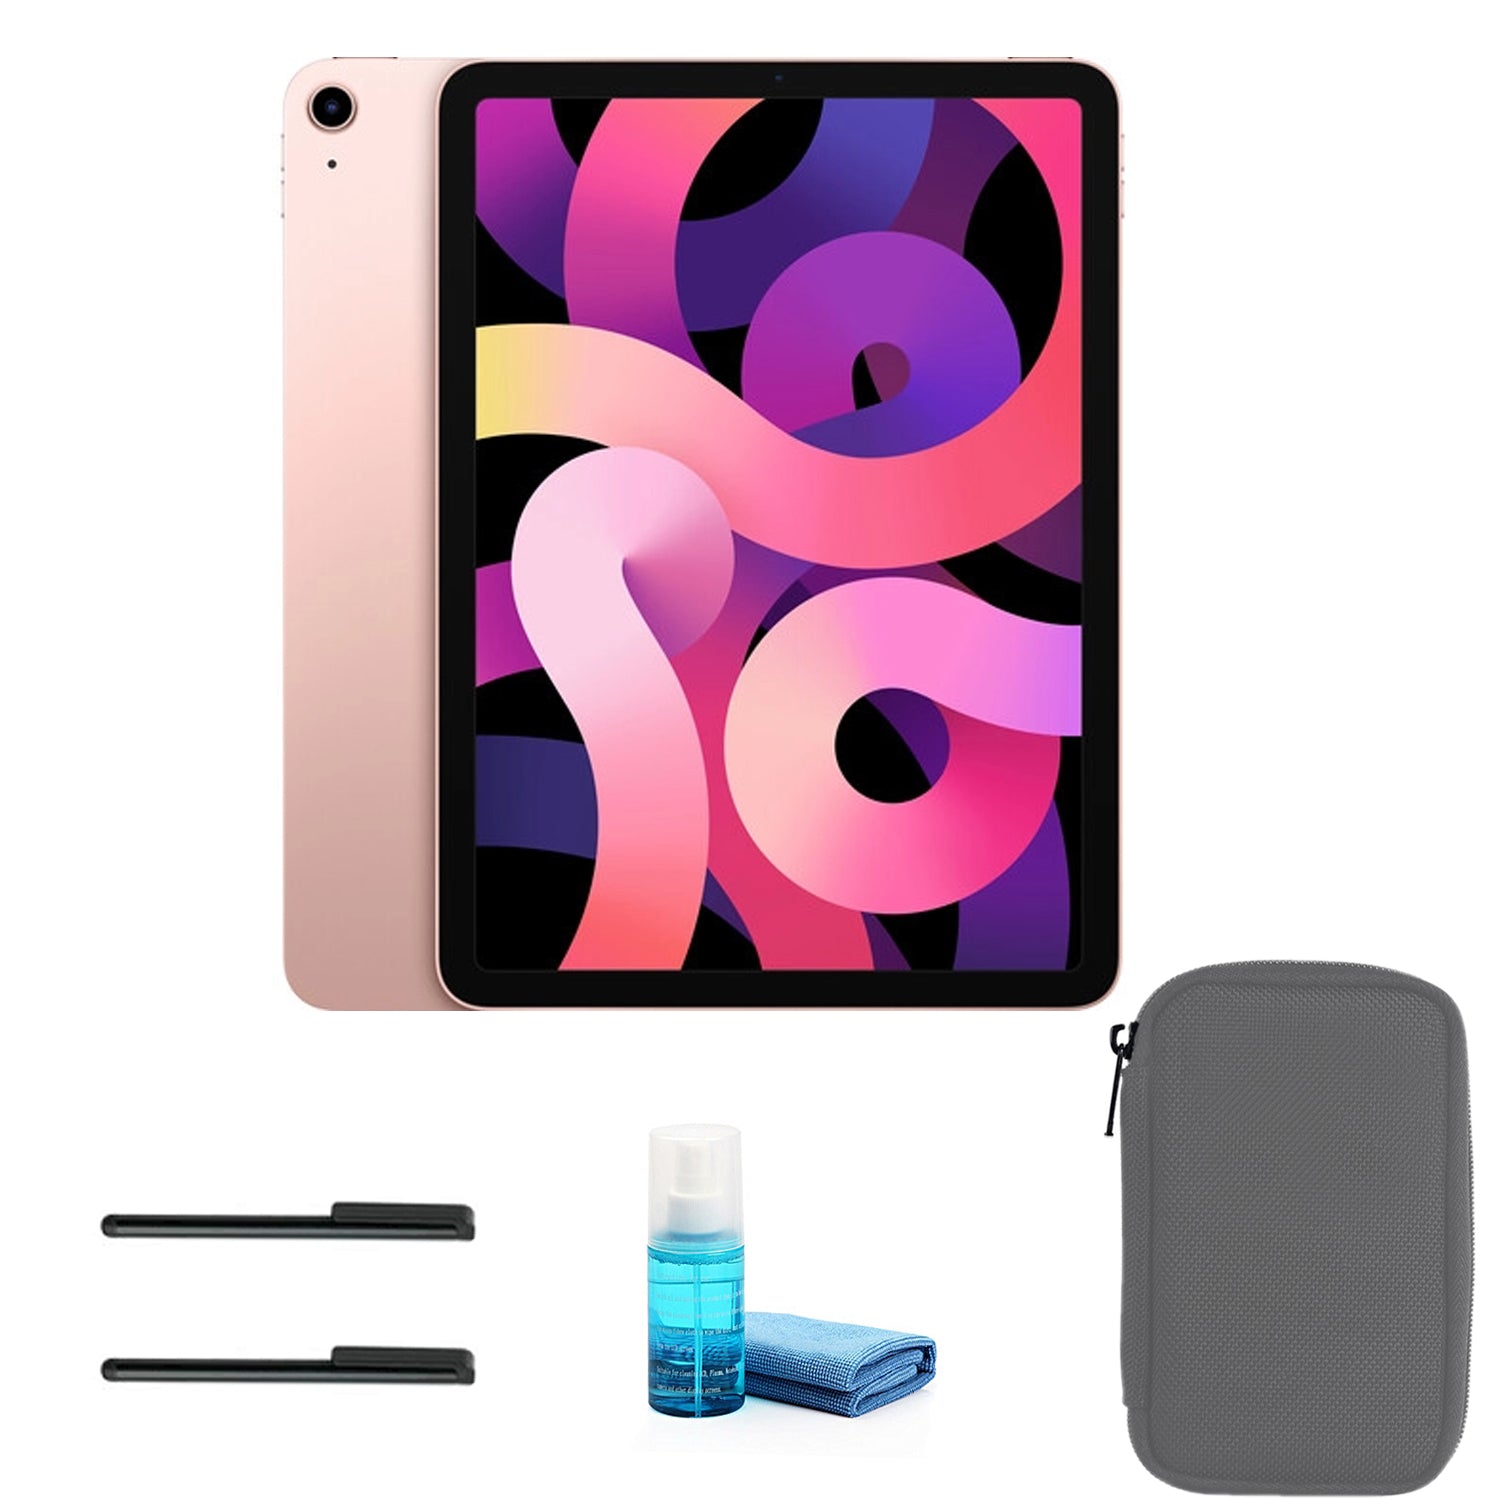 Apple iPad Air 10.9 Inch (64GB, Wi-Fi Only, Rose Gold)) with Gray Sleeve Bundle